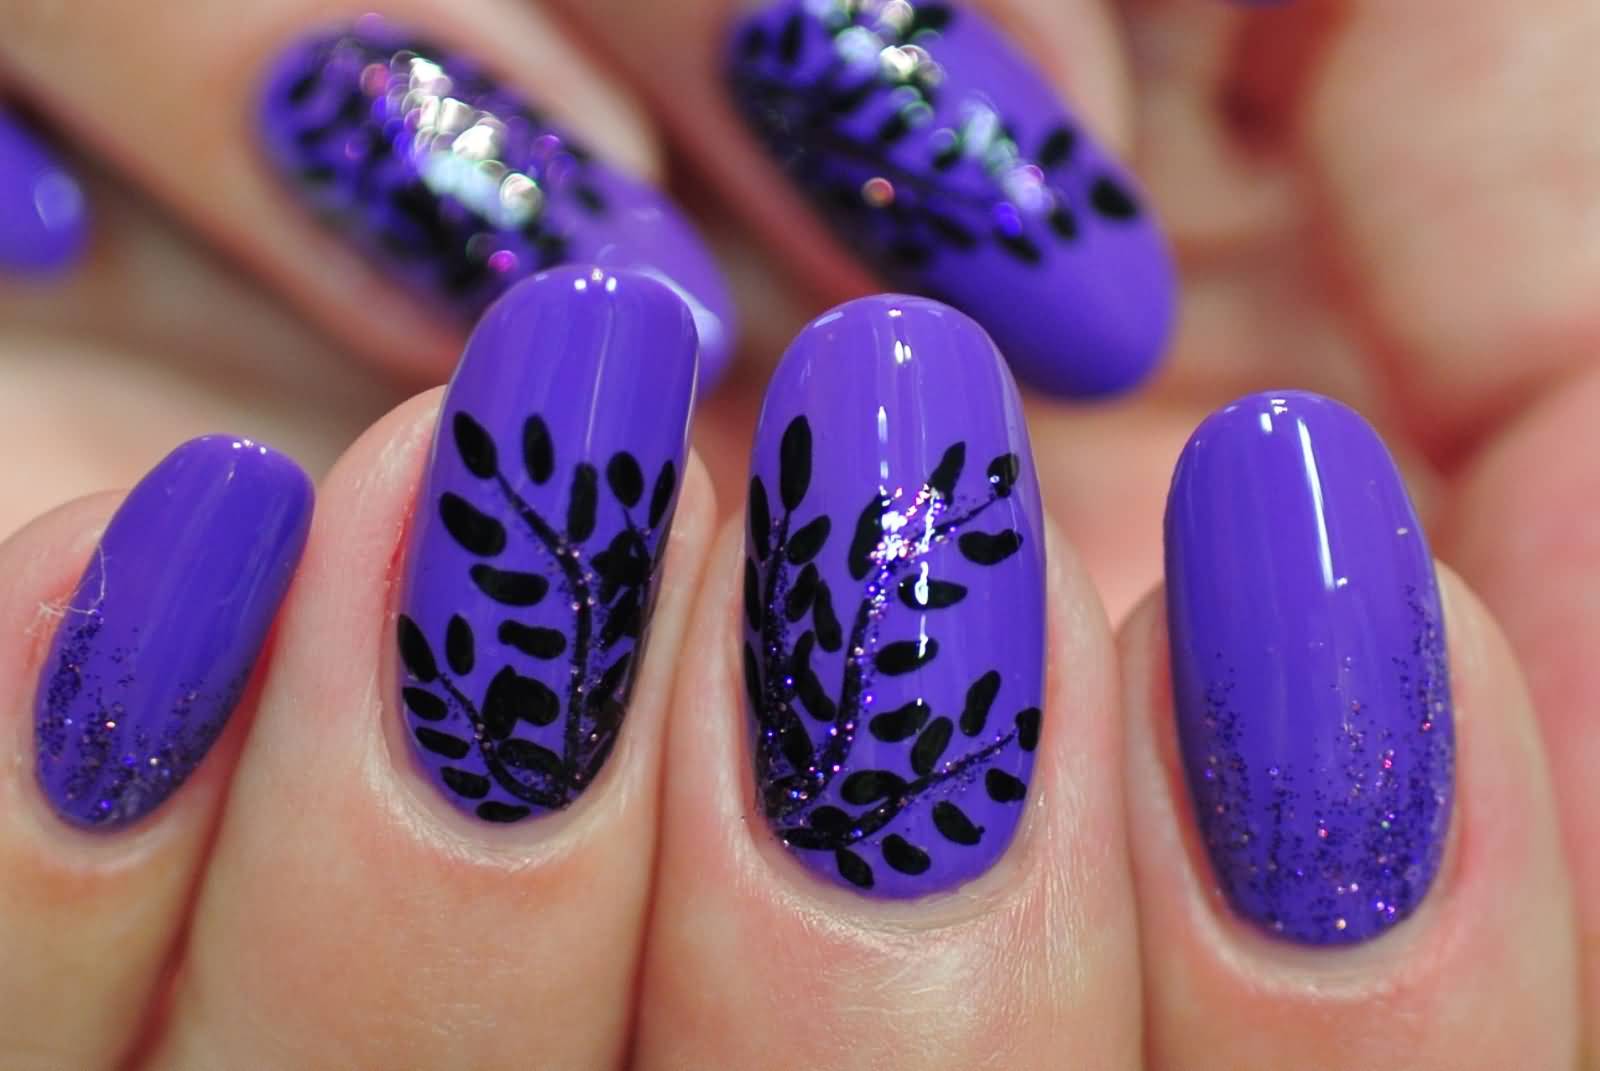 5. "Nail Art Design Techniques: Step-by-Step Instructions for 25 Beautiful Designs" - wide 4